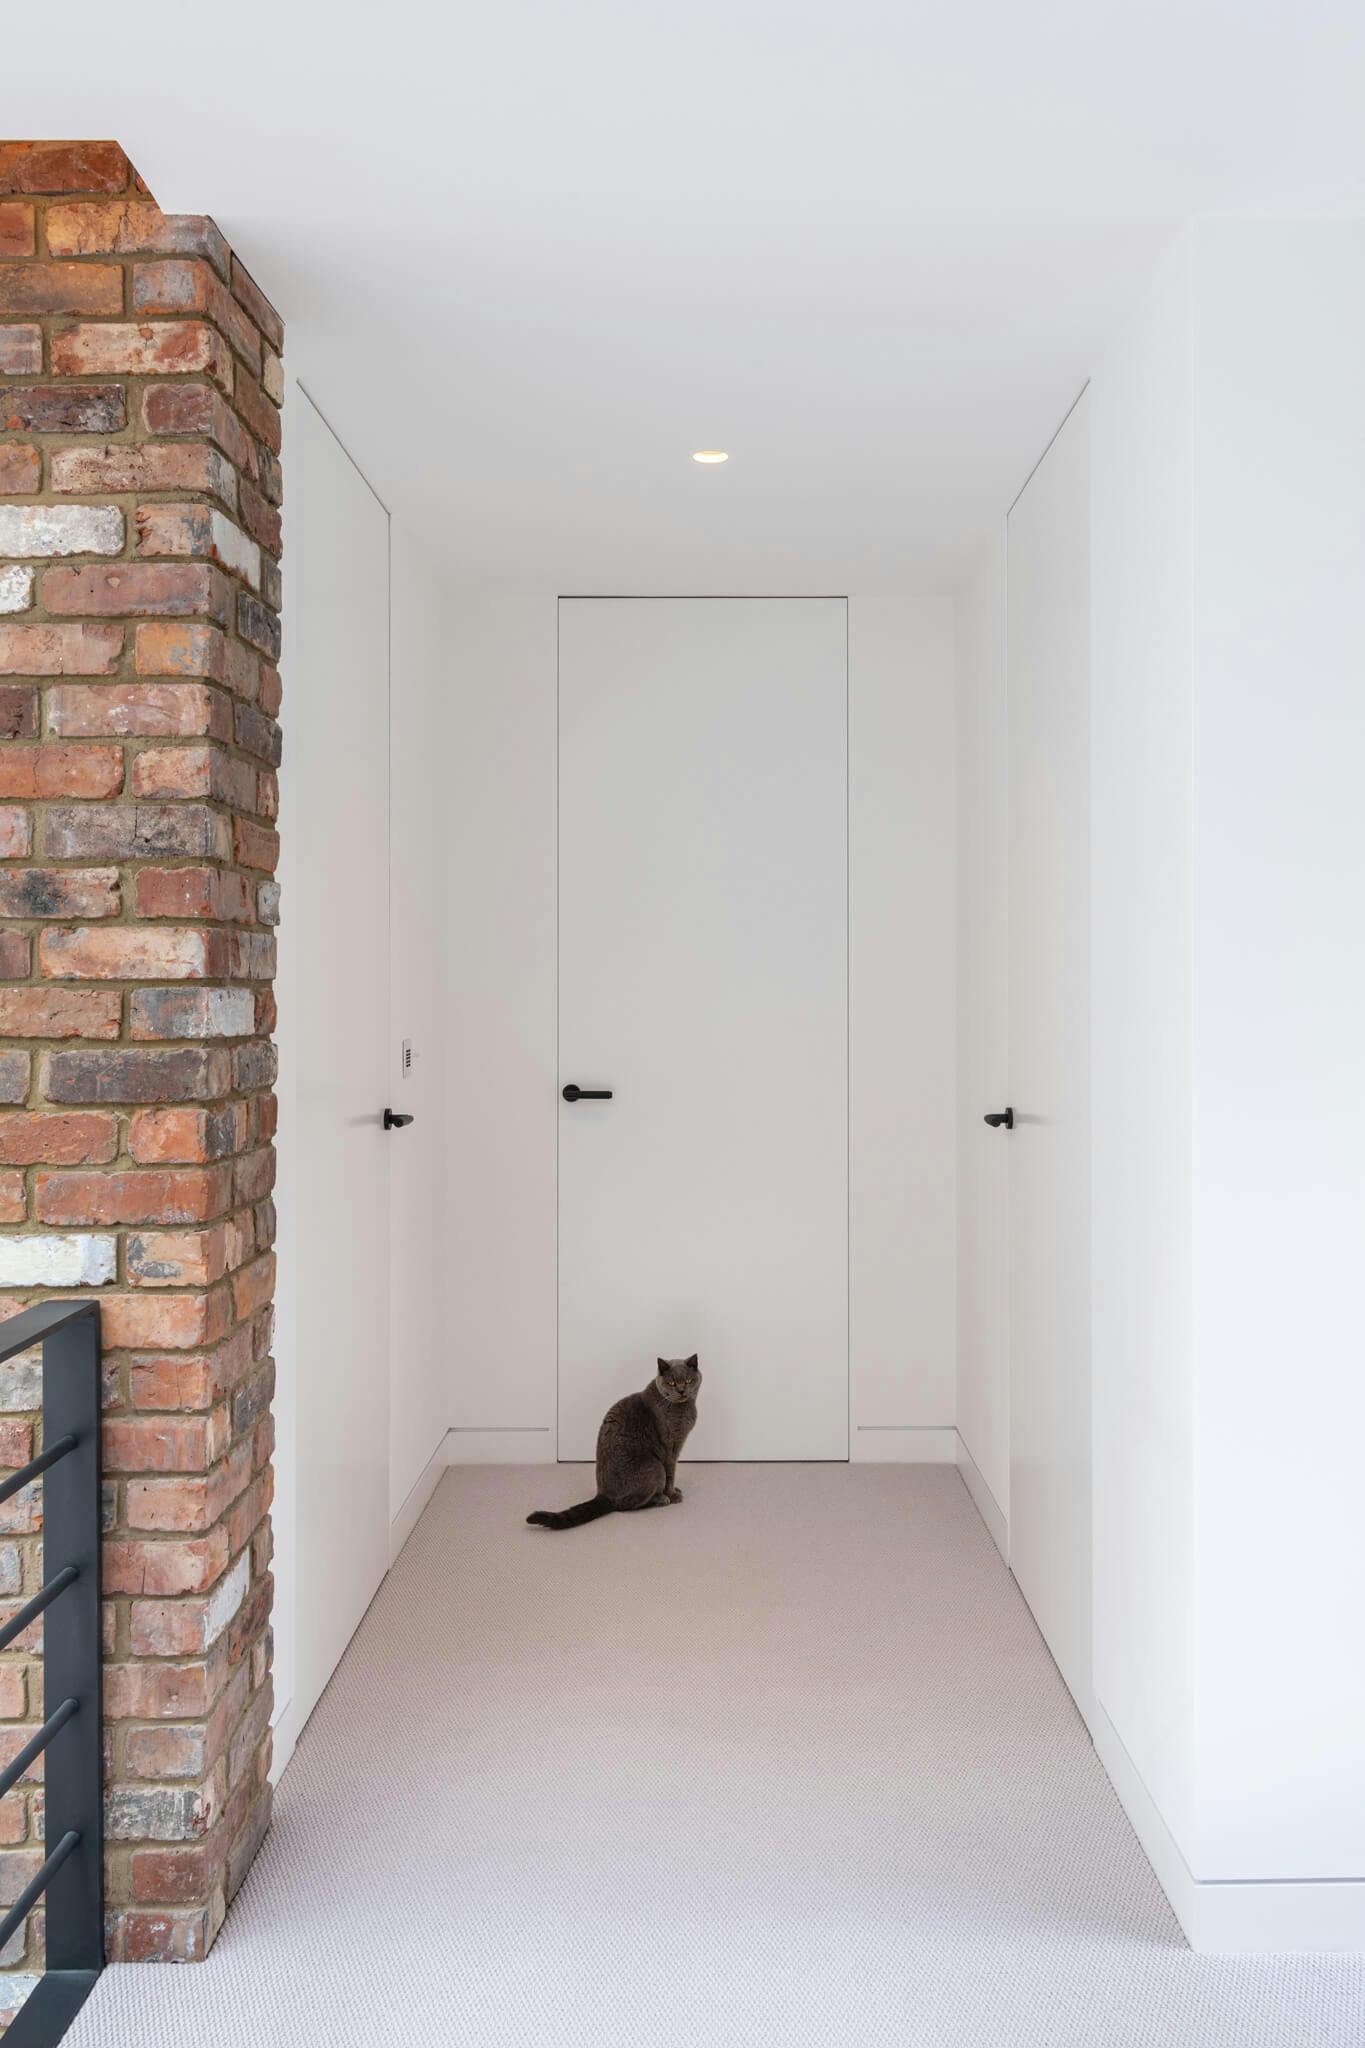 Carpeted corridor with brick feature wall and steel rail leading to a closed white flush door with a black cat sitting in front.